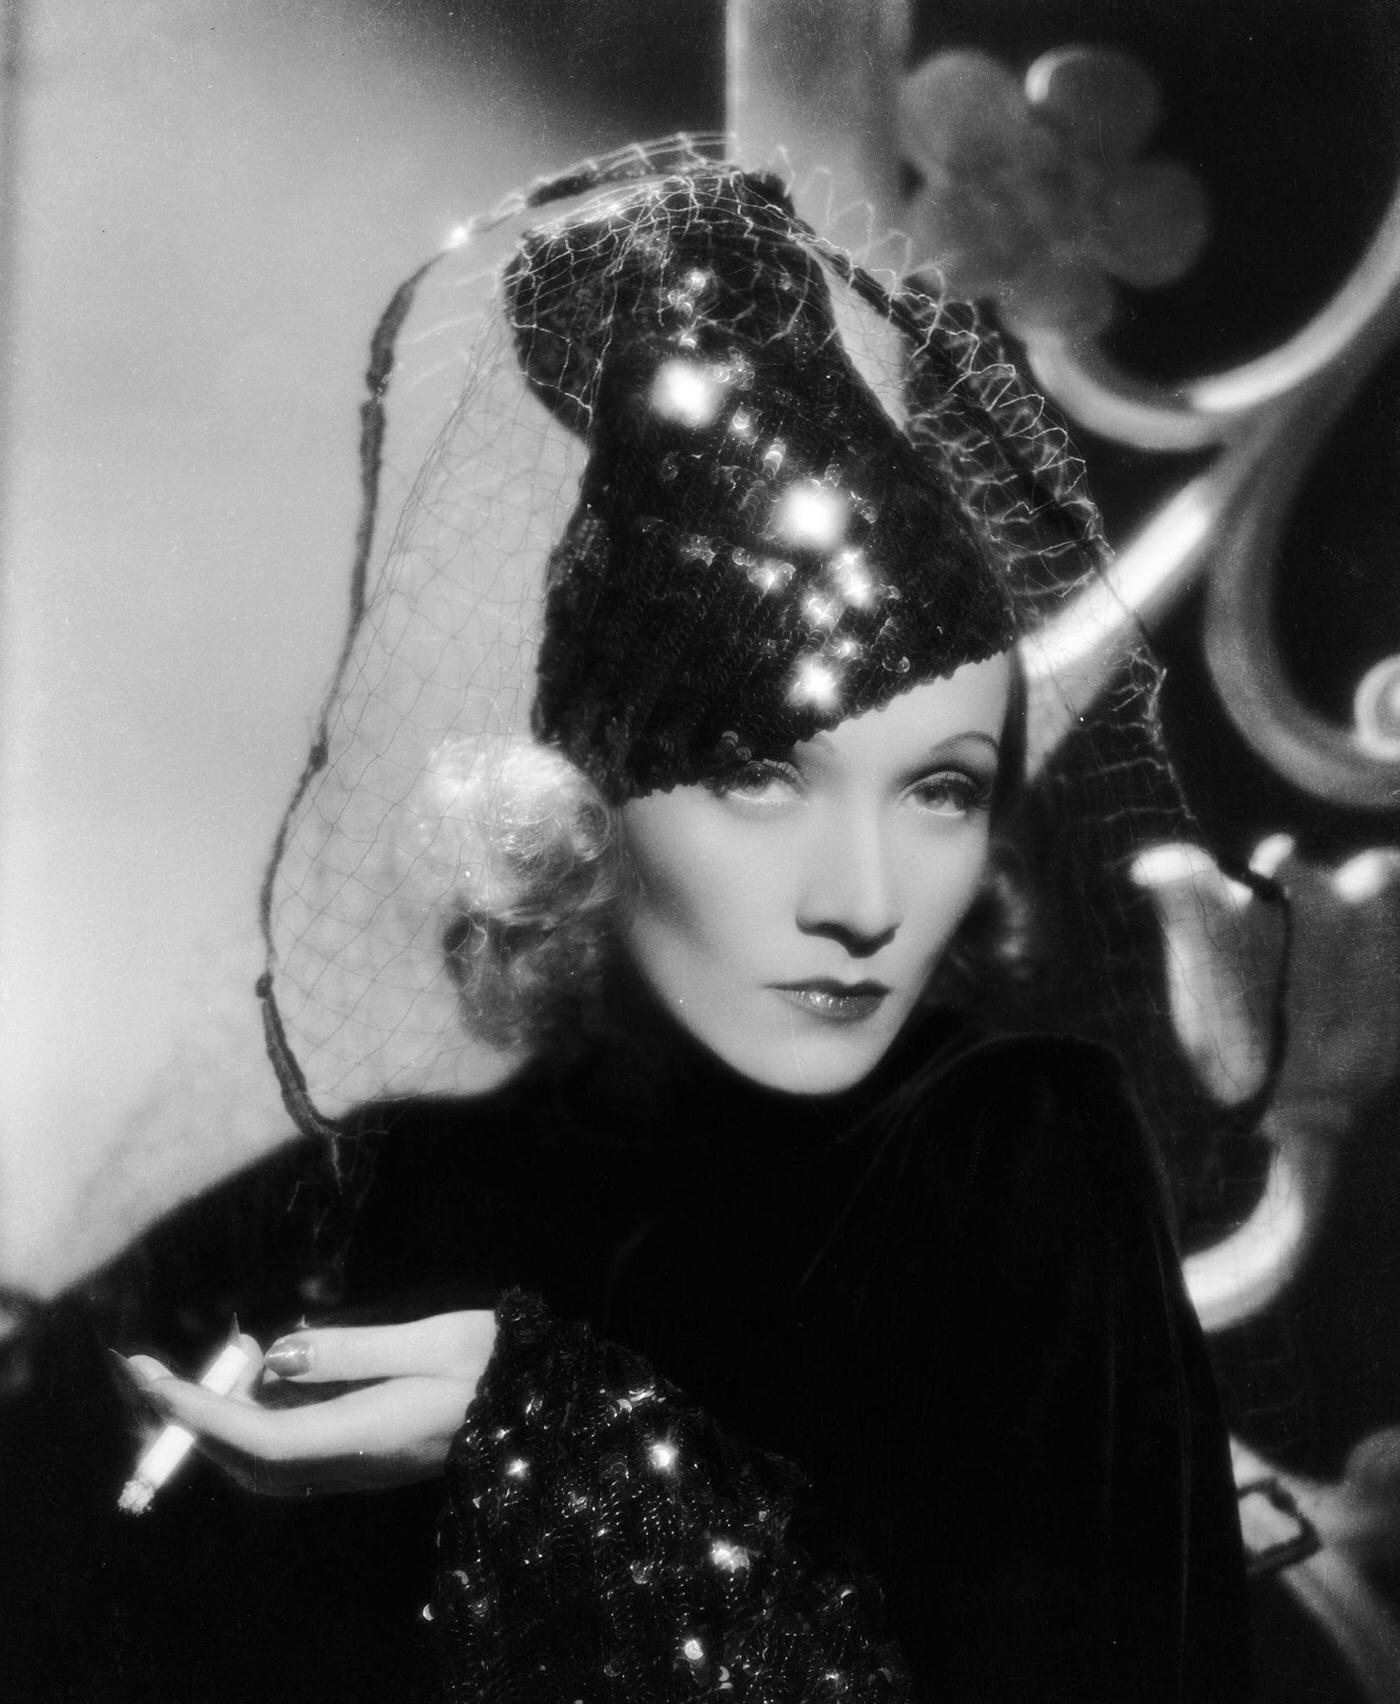 Maria Barker, played by Marlene Dietrich, is the central character in the film 'Angel.'